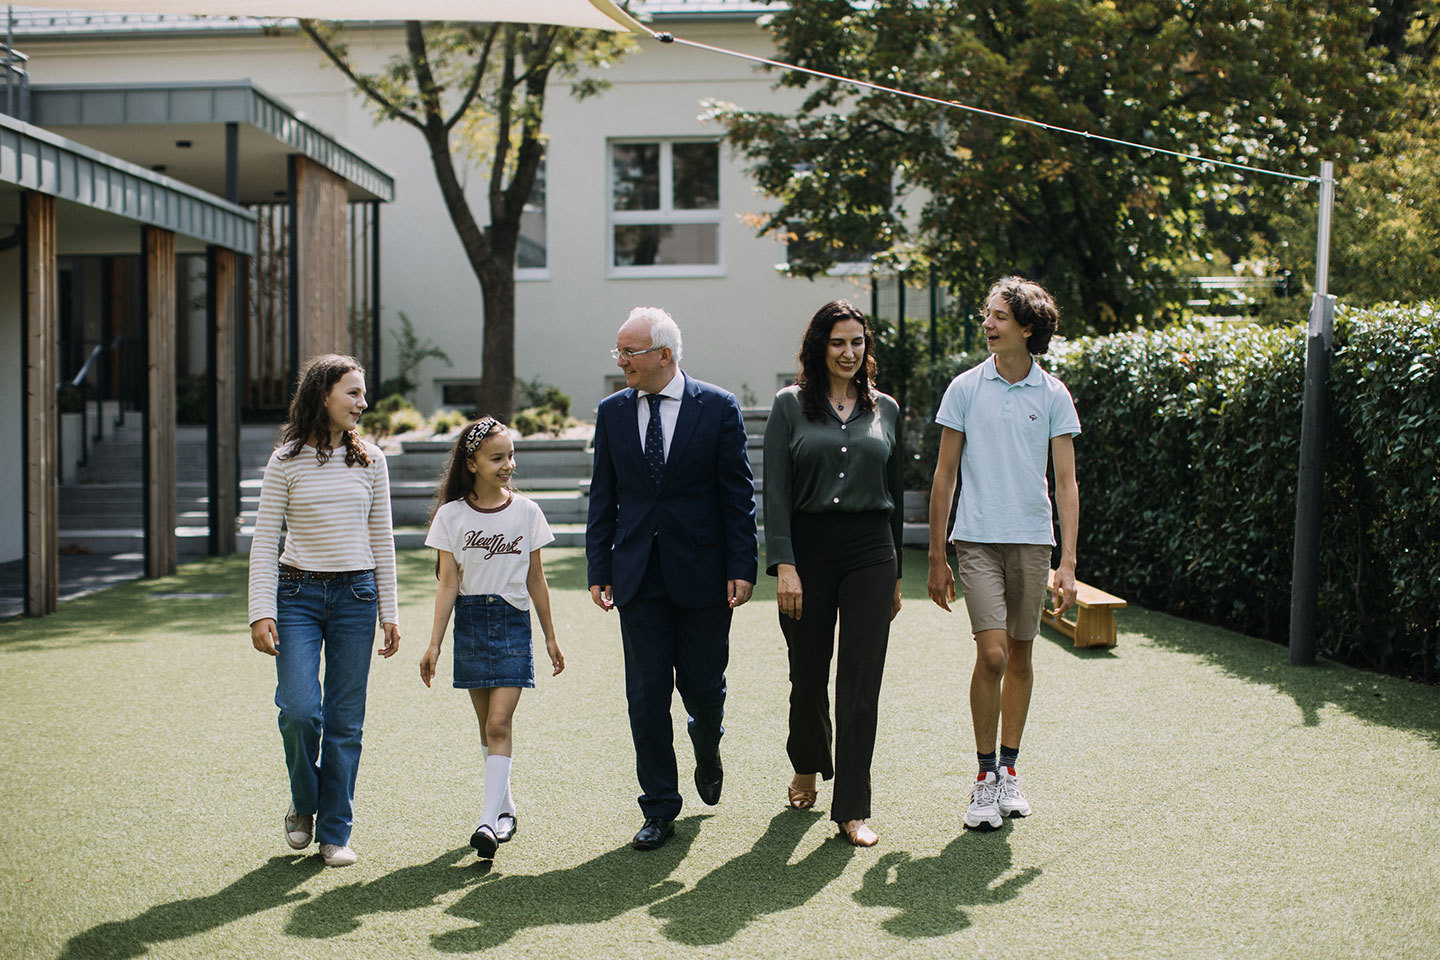 Mr. King in the grounds of the School with his family, wife Loredana, son Octavian and daughters Annabelle and Alexandra.